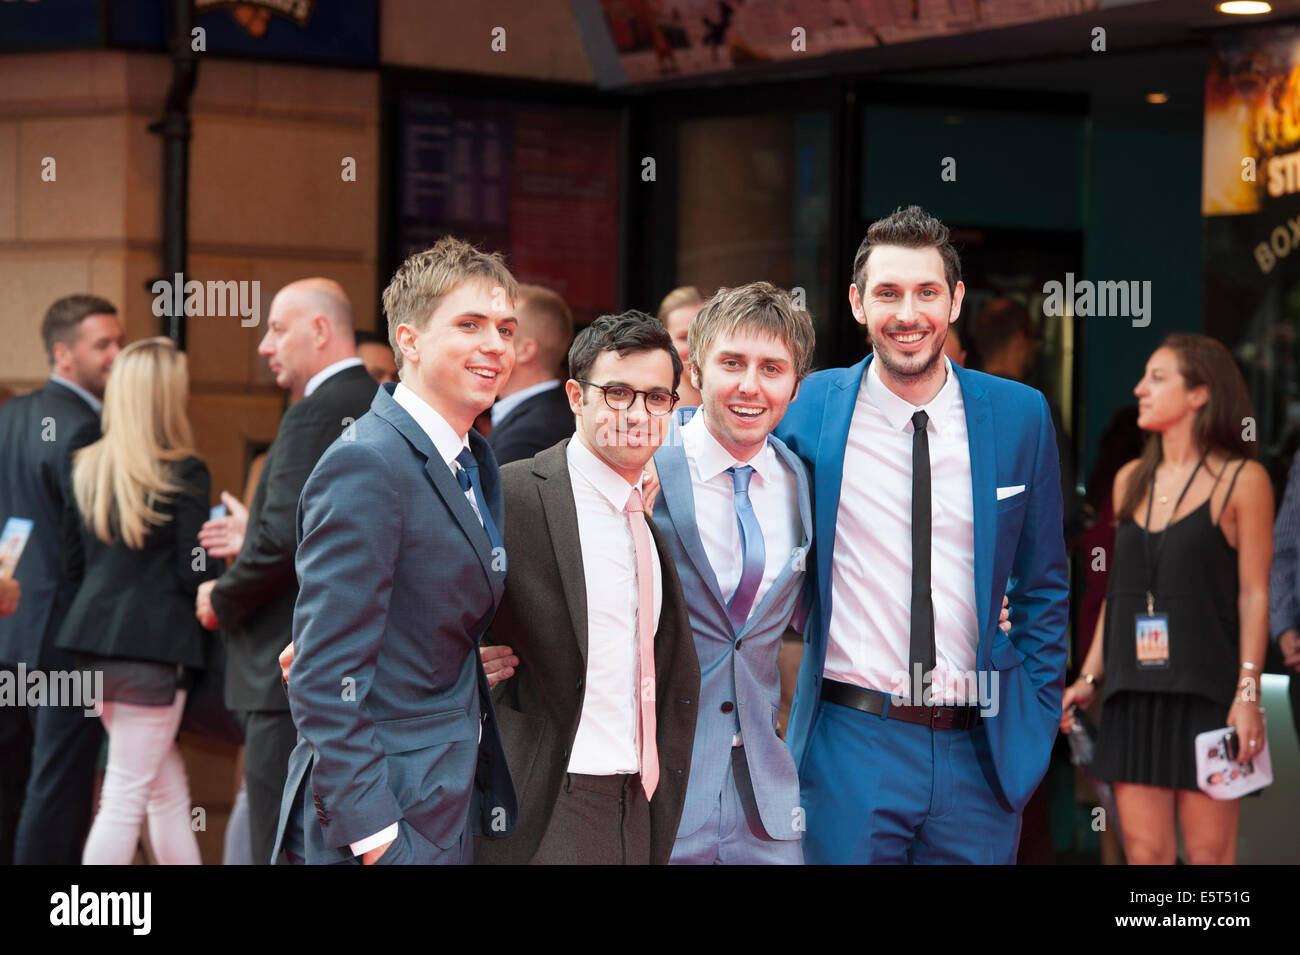 Leicester Square, London, UK. 5th August 2014. The second instalment of The Inbetweeners premieres at The Vue cinema in Leicester Square, London. Pictured: L-R: JOE THOMAS, SIMON BIRD, JAMES BUCKLEY, BLAKE HARRISON. Credit:  Lee Thomas/Alamy Live News Stock Photo